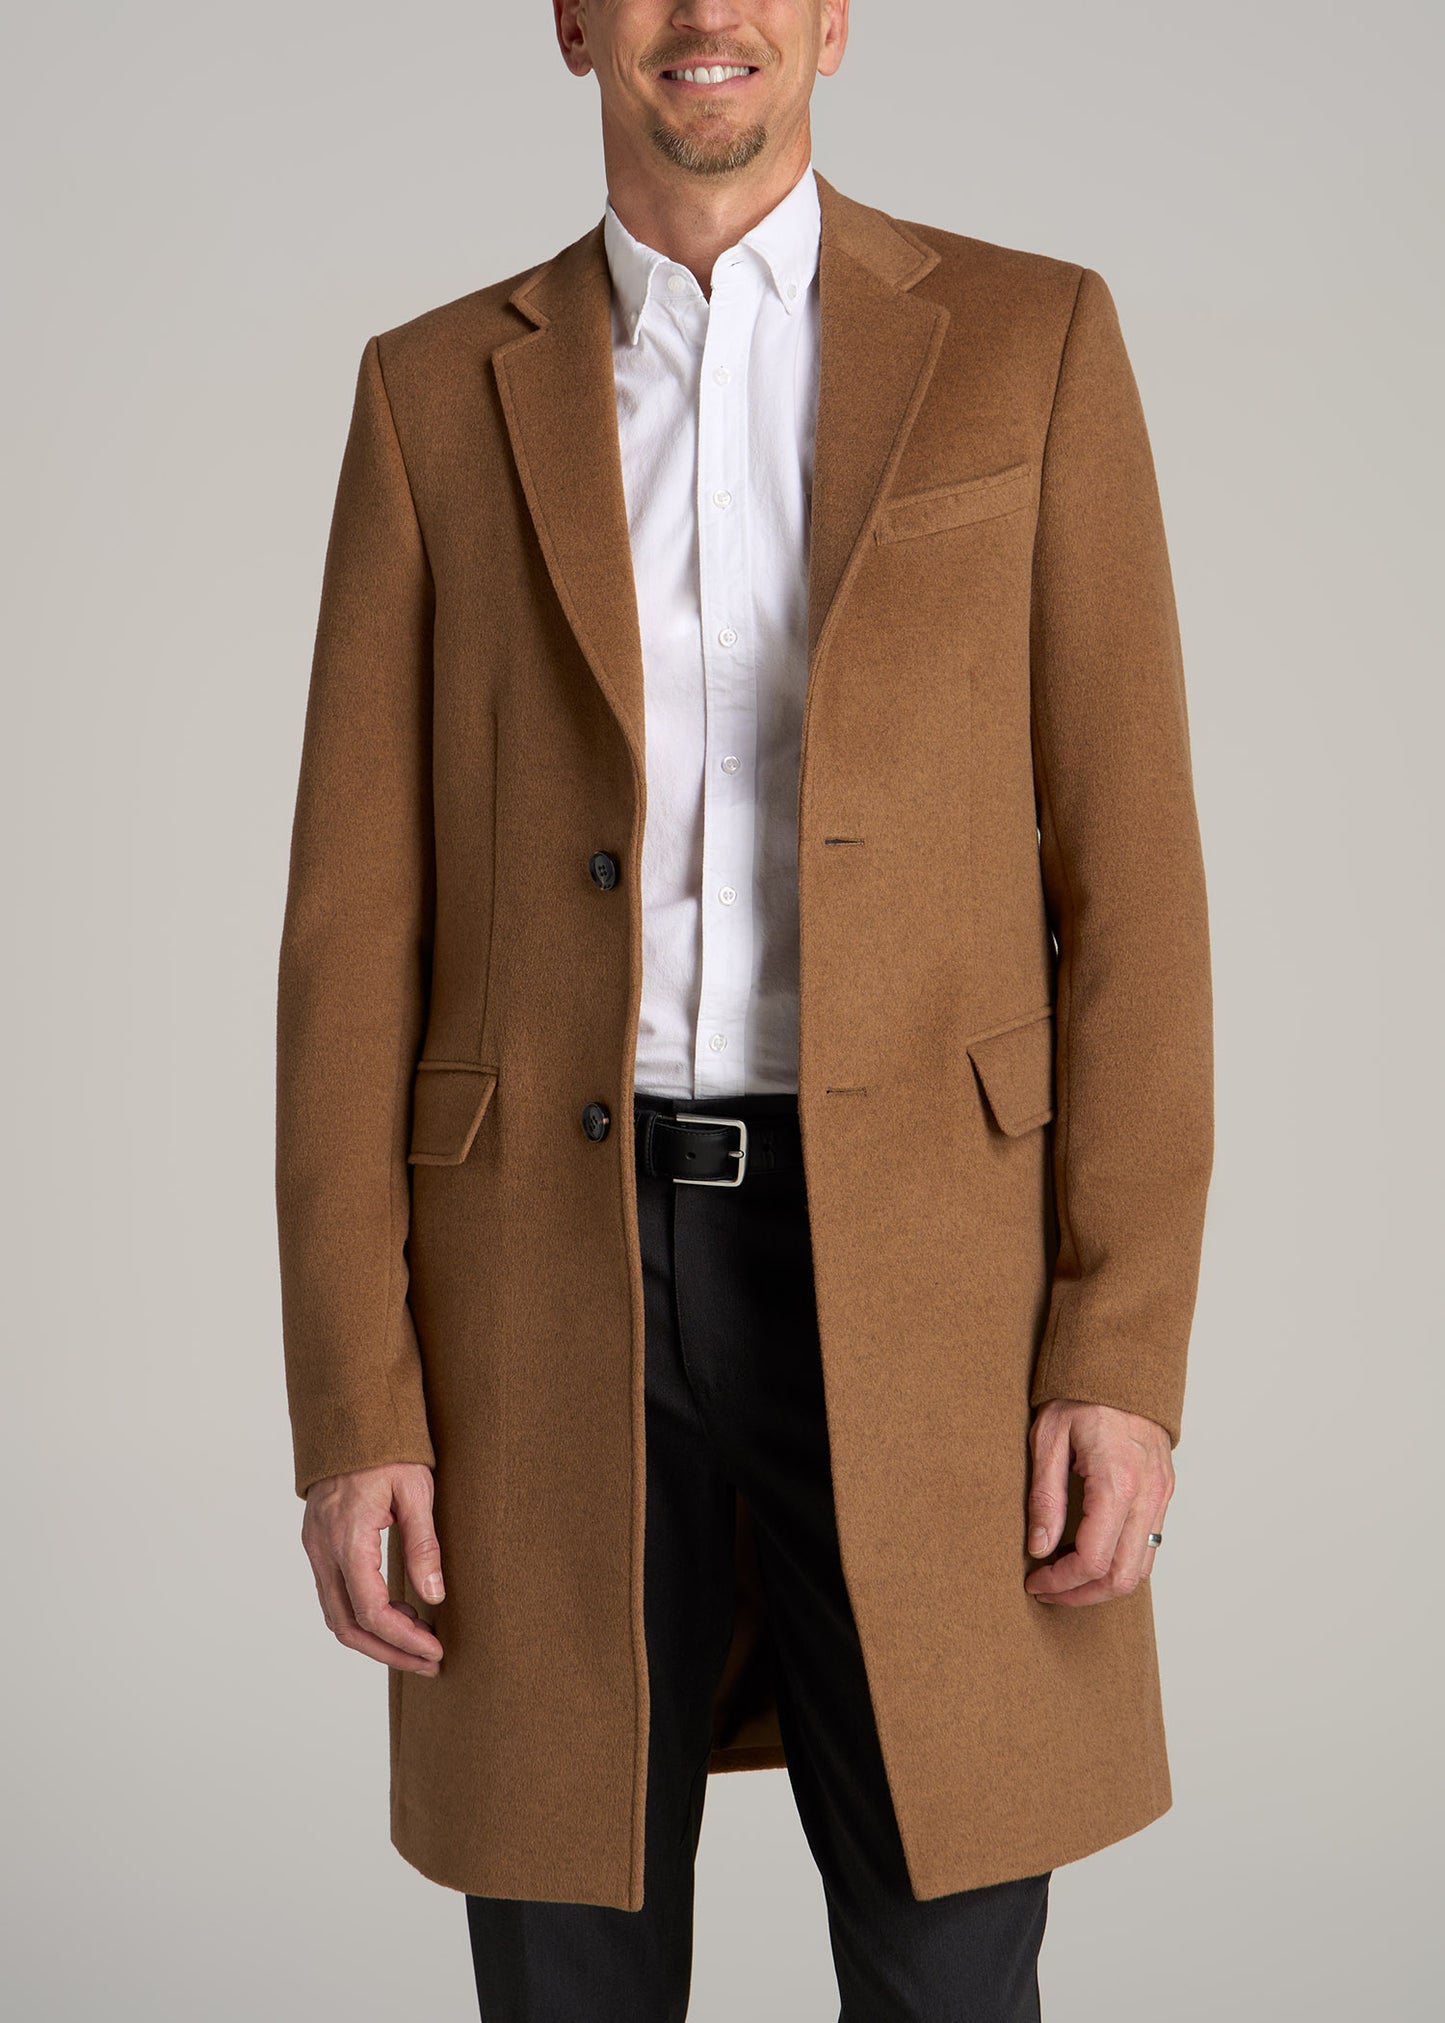 Wool Coat for Tall Men in Camel